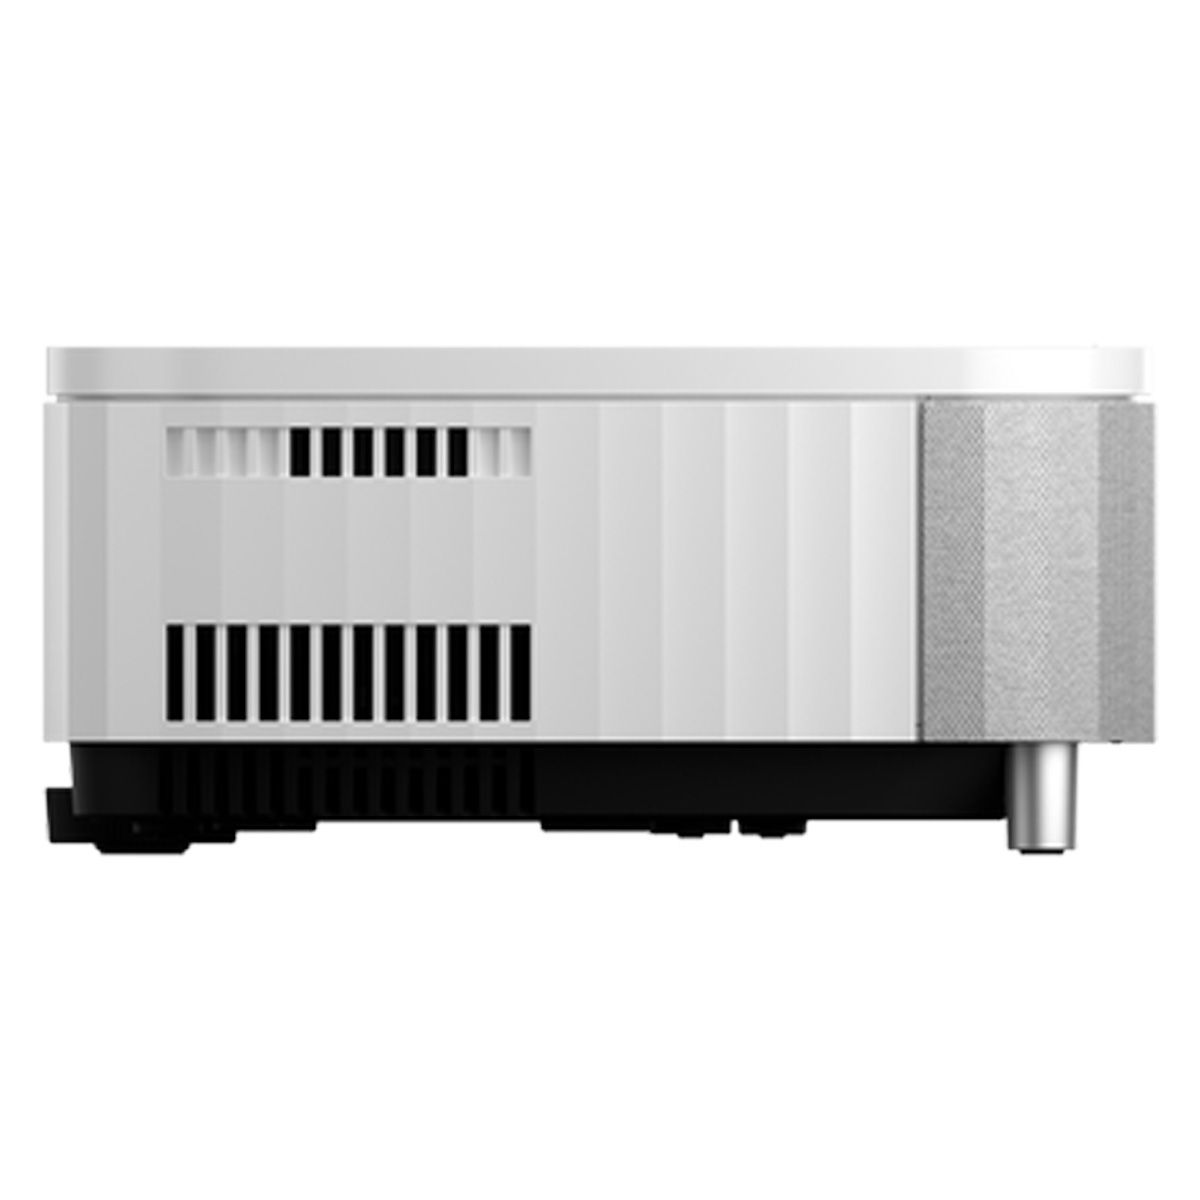 Epson LS800 UST Projector - White - side view